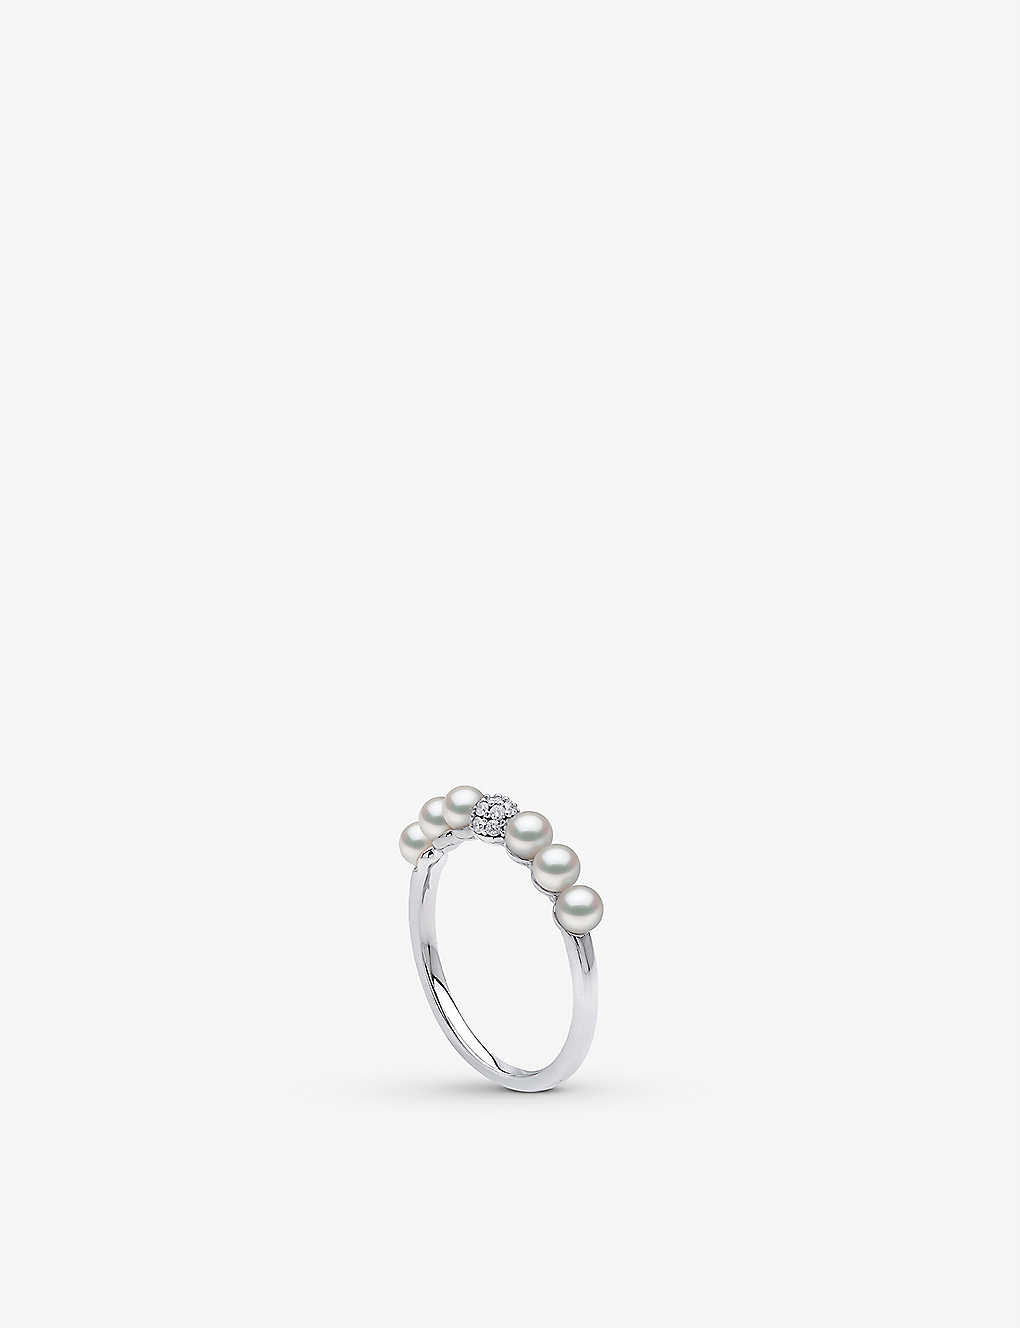 Yoko London Eclipse 18ct White-gold, 0.10ct Brilliant-cut Diamond And Akoya Pearl Ring In White Gold